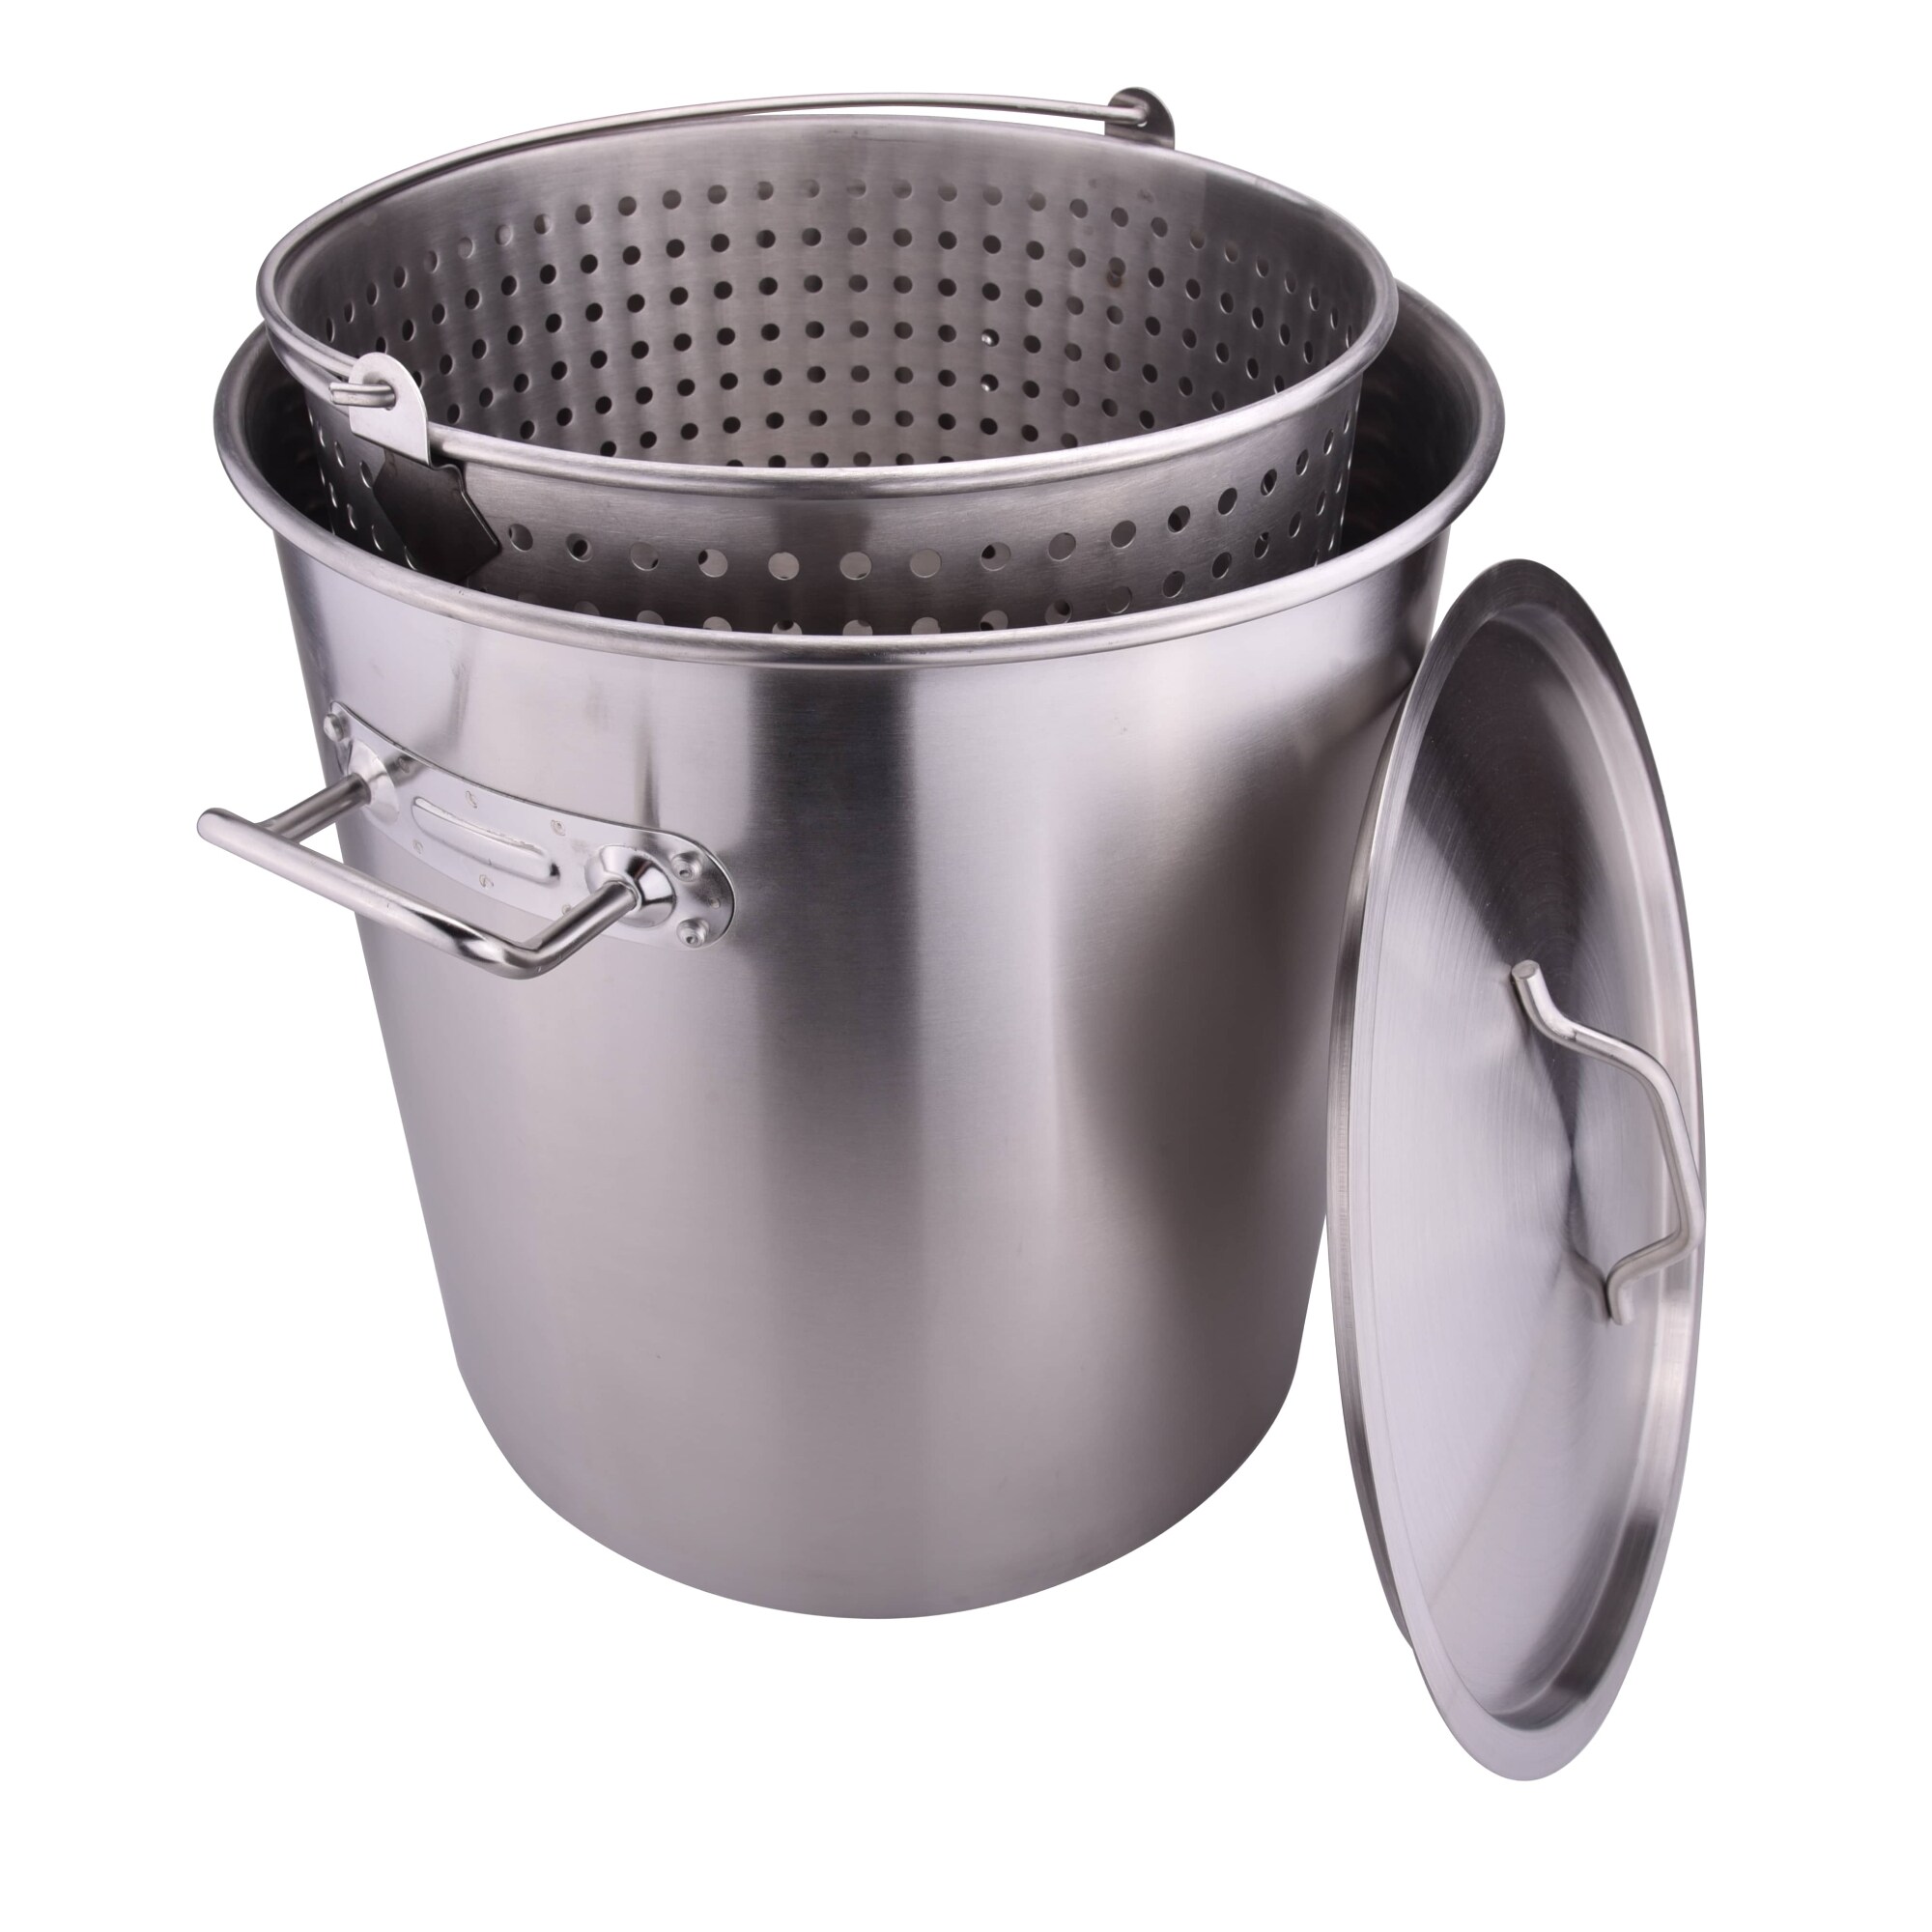  ARC 64-Quart Stainless Steel Seafood Boil Pot with